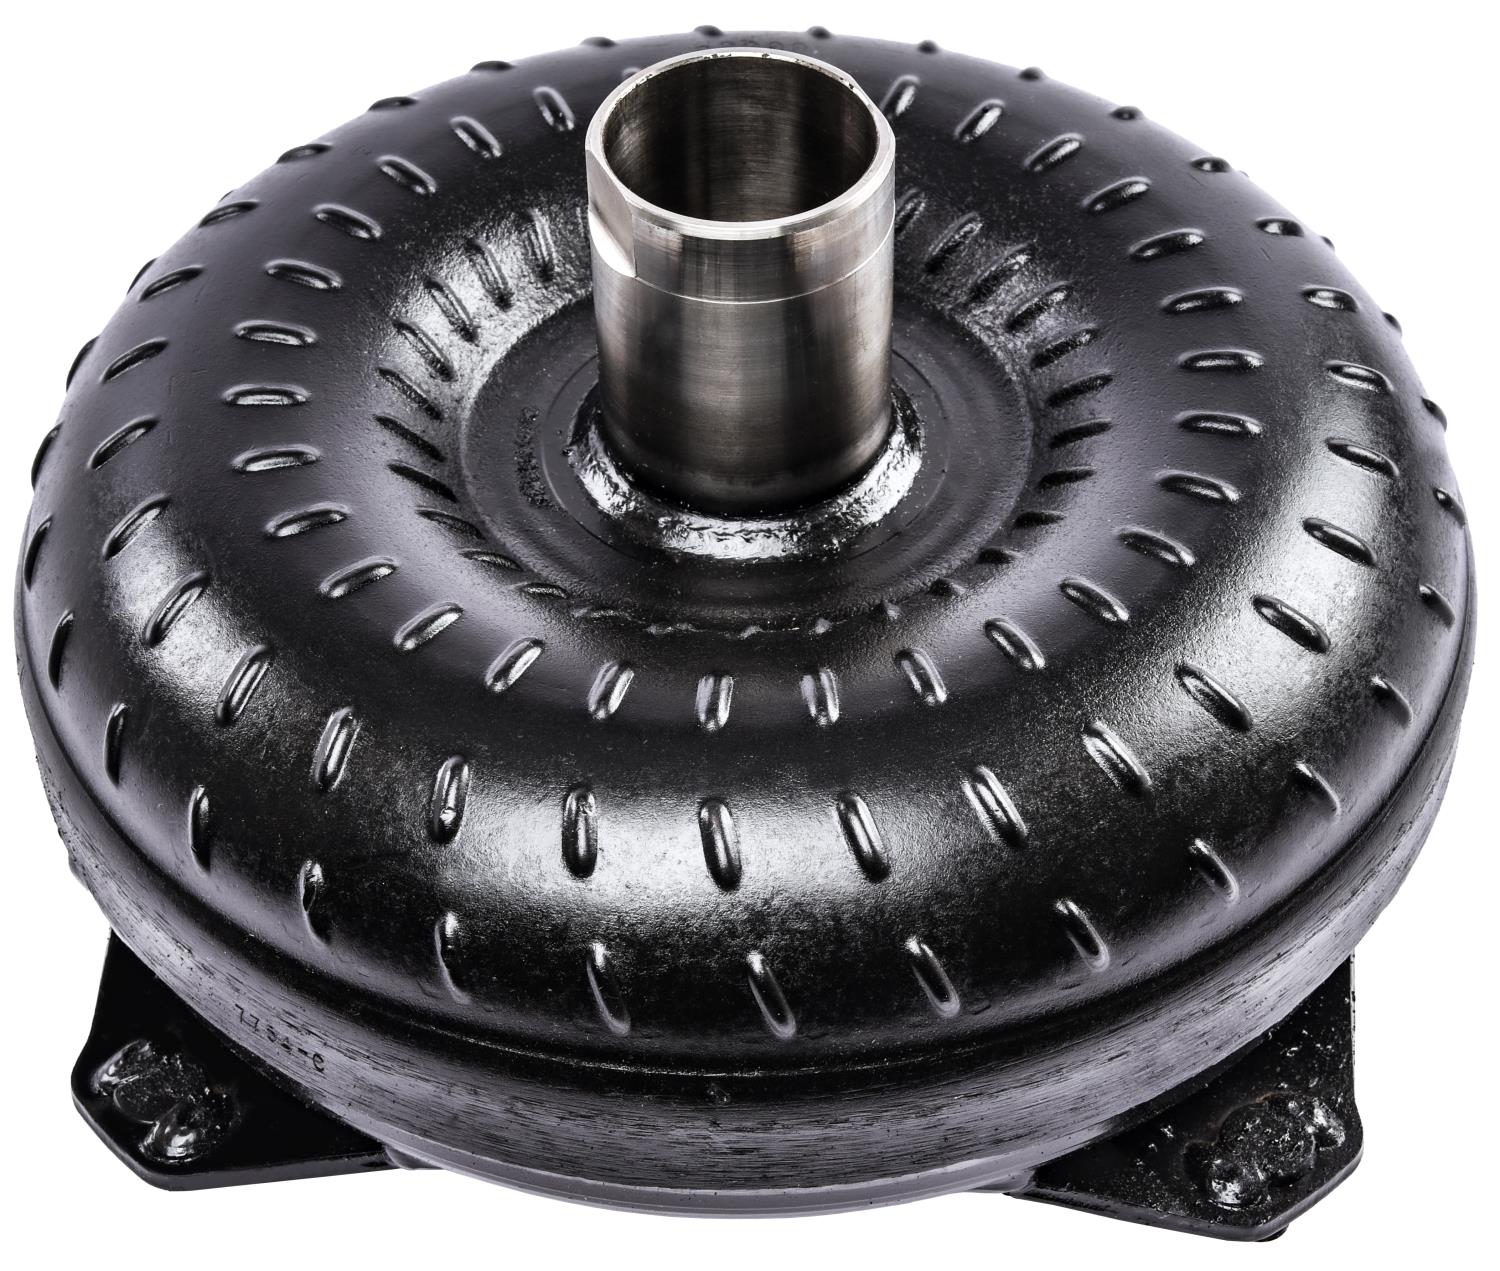 JEGS 60409: Torque Converter | Fits Ford C4 Automatic Transmission | 10 in.  Diameter | 26-spline Input | 10.500 in. Bolt Circle | 1.375 in. Crank Pilot  | 2,600 - 2,900 RPM Stall Speed - JEGS